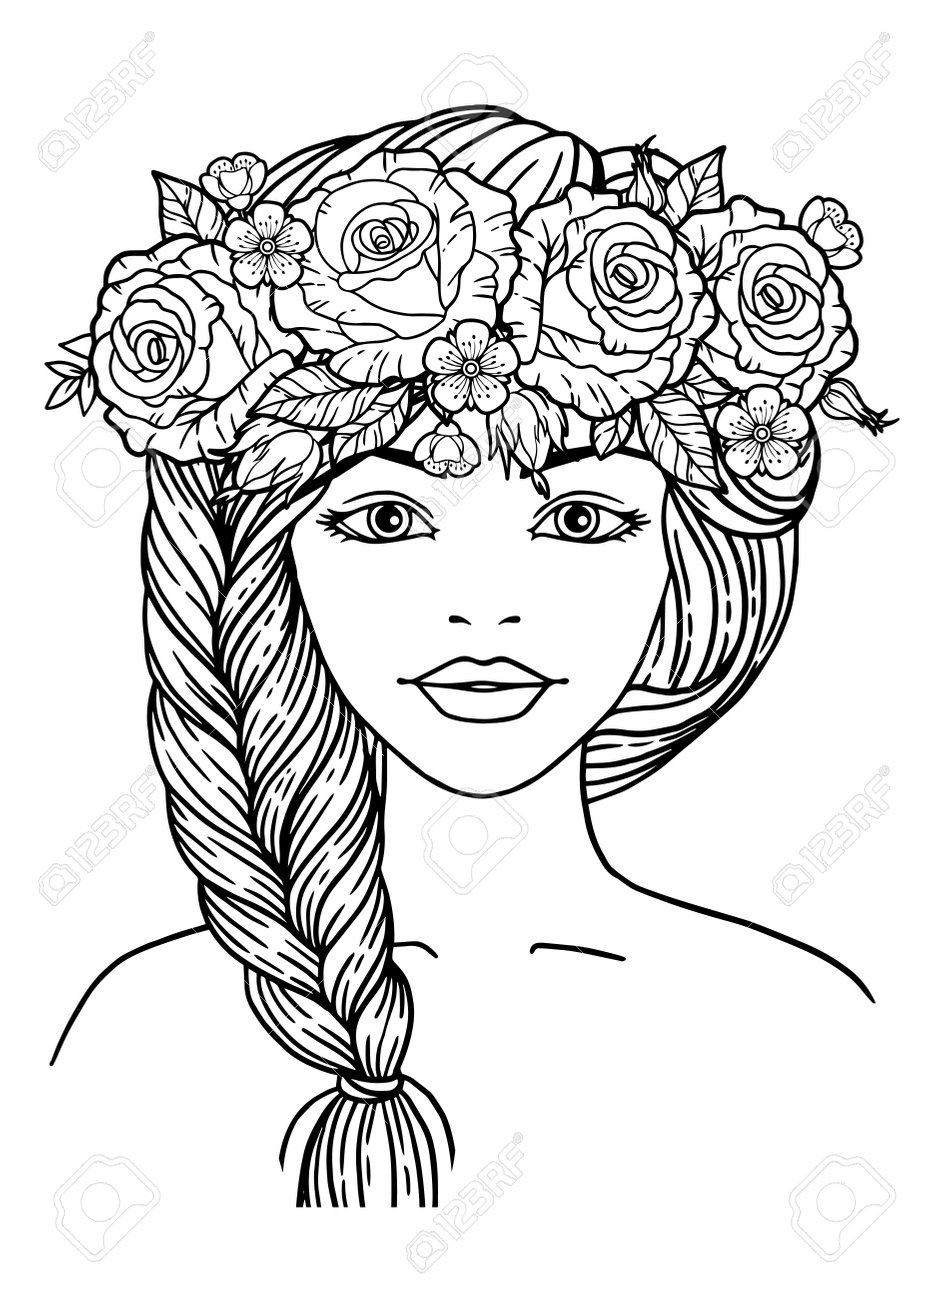 Vector coloring book page for adults black and white illustration a beautiful girl with a braid and a wreath of roses on her head royalty free svg cliparts vectors and stock illustration